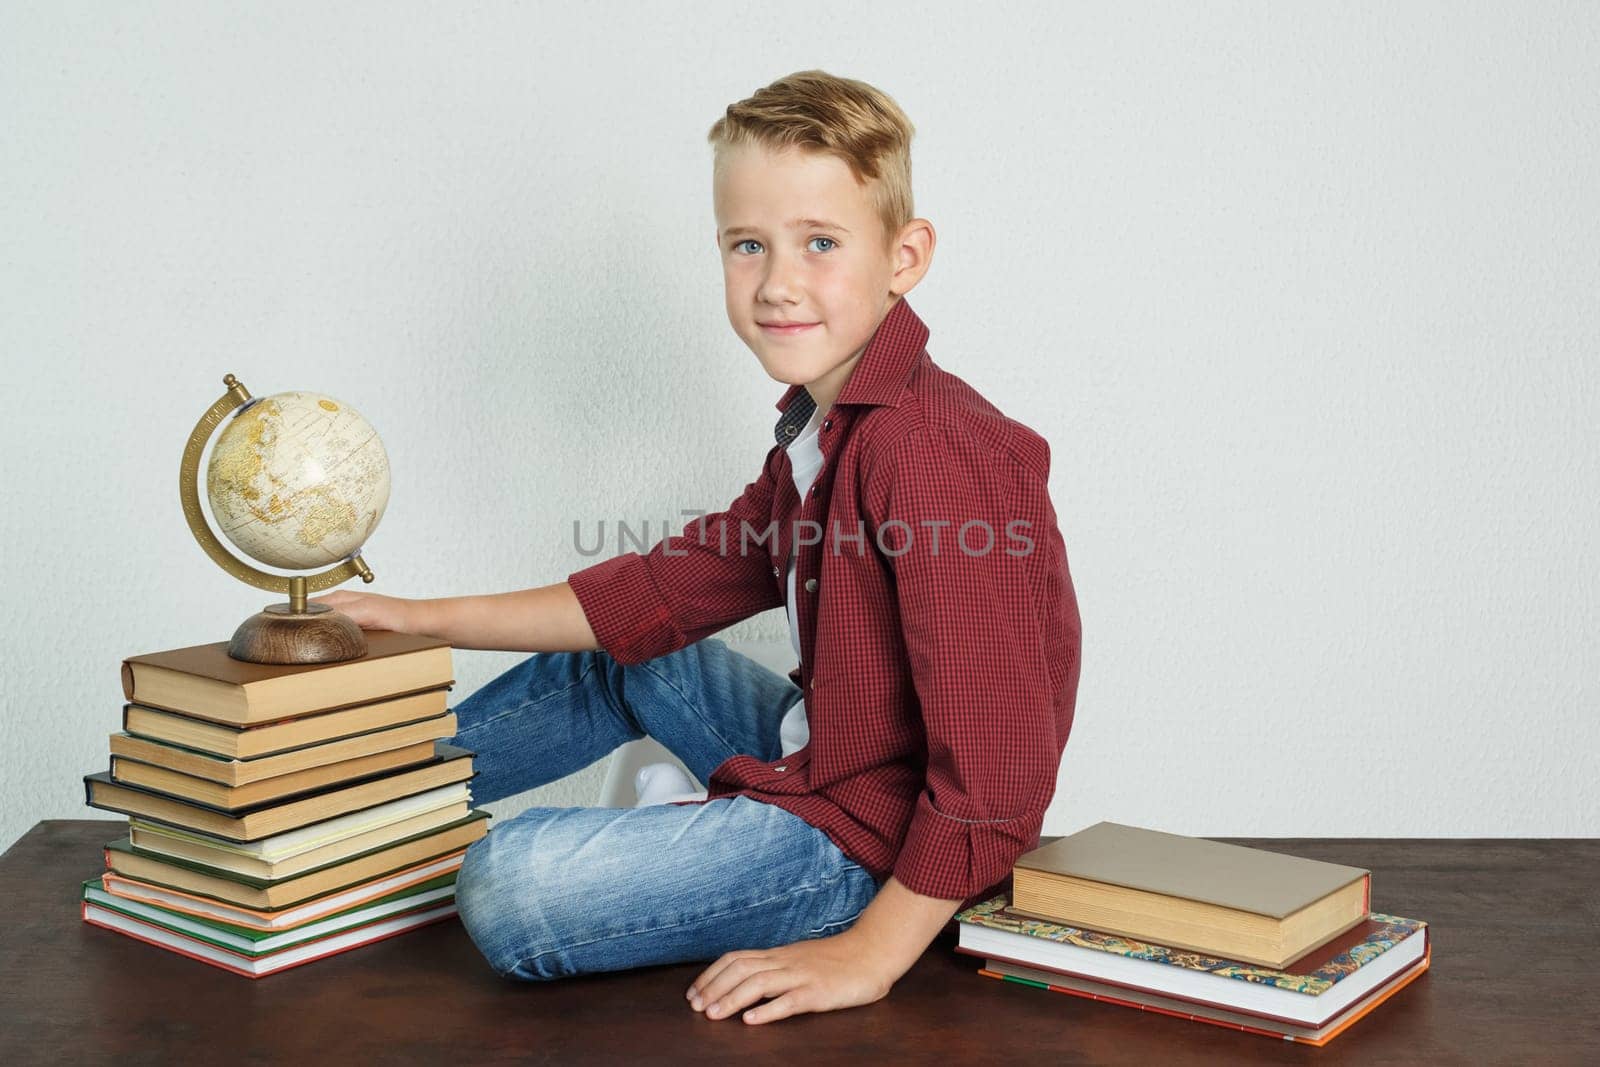 A schoolboy sits at a desk near books and holds a globe with his hand. by Sd28DimoN_1976